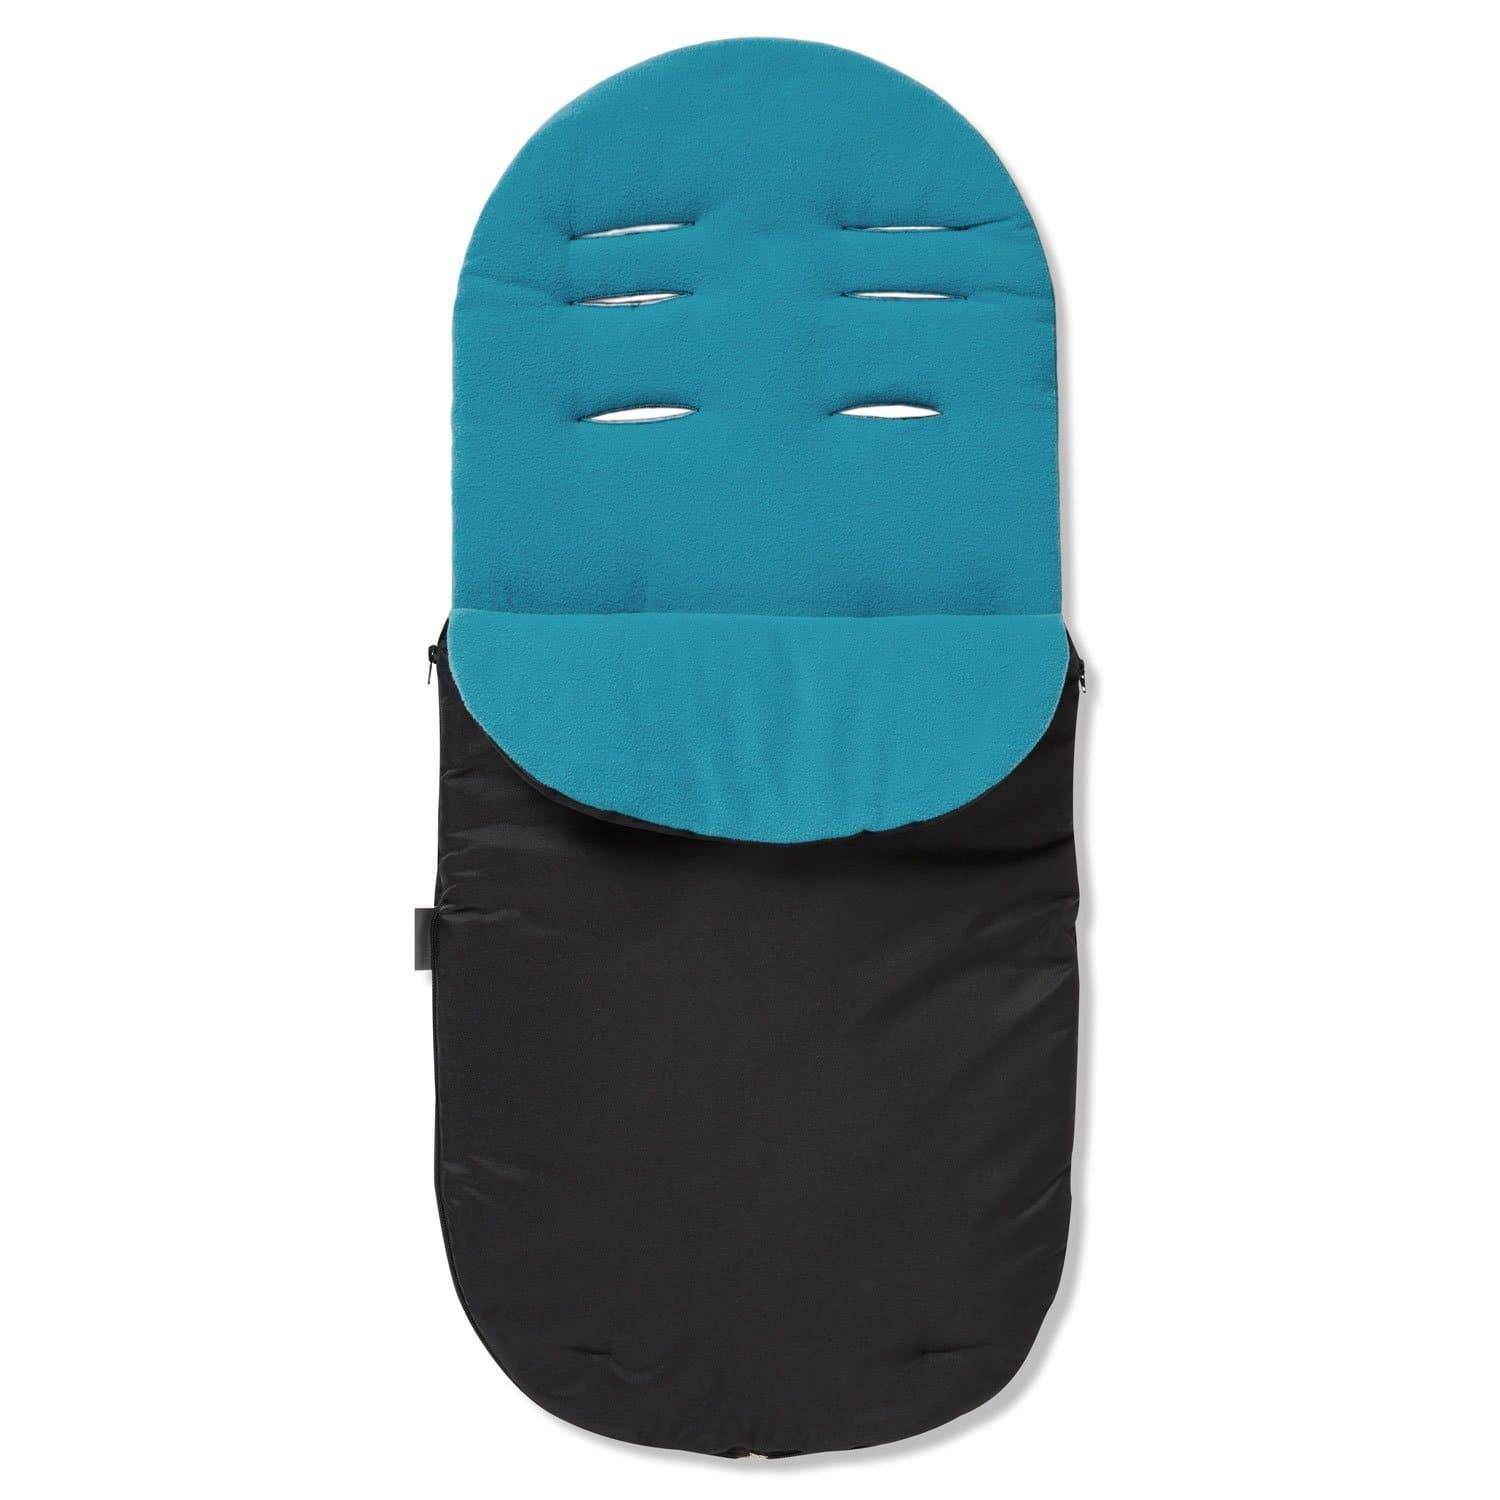 Footmuff / Cosy Toes Compatible with Orbit - Turquoise / Fits All Models | For Your Little One